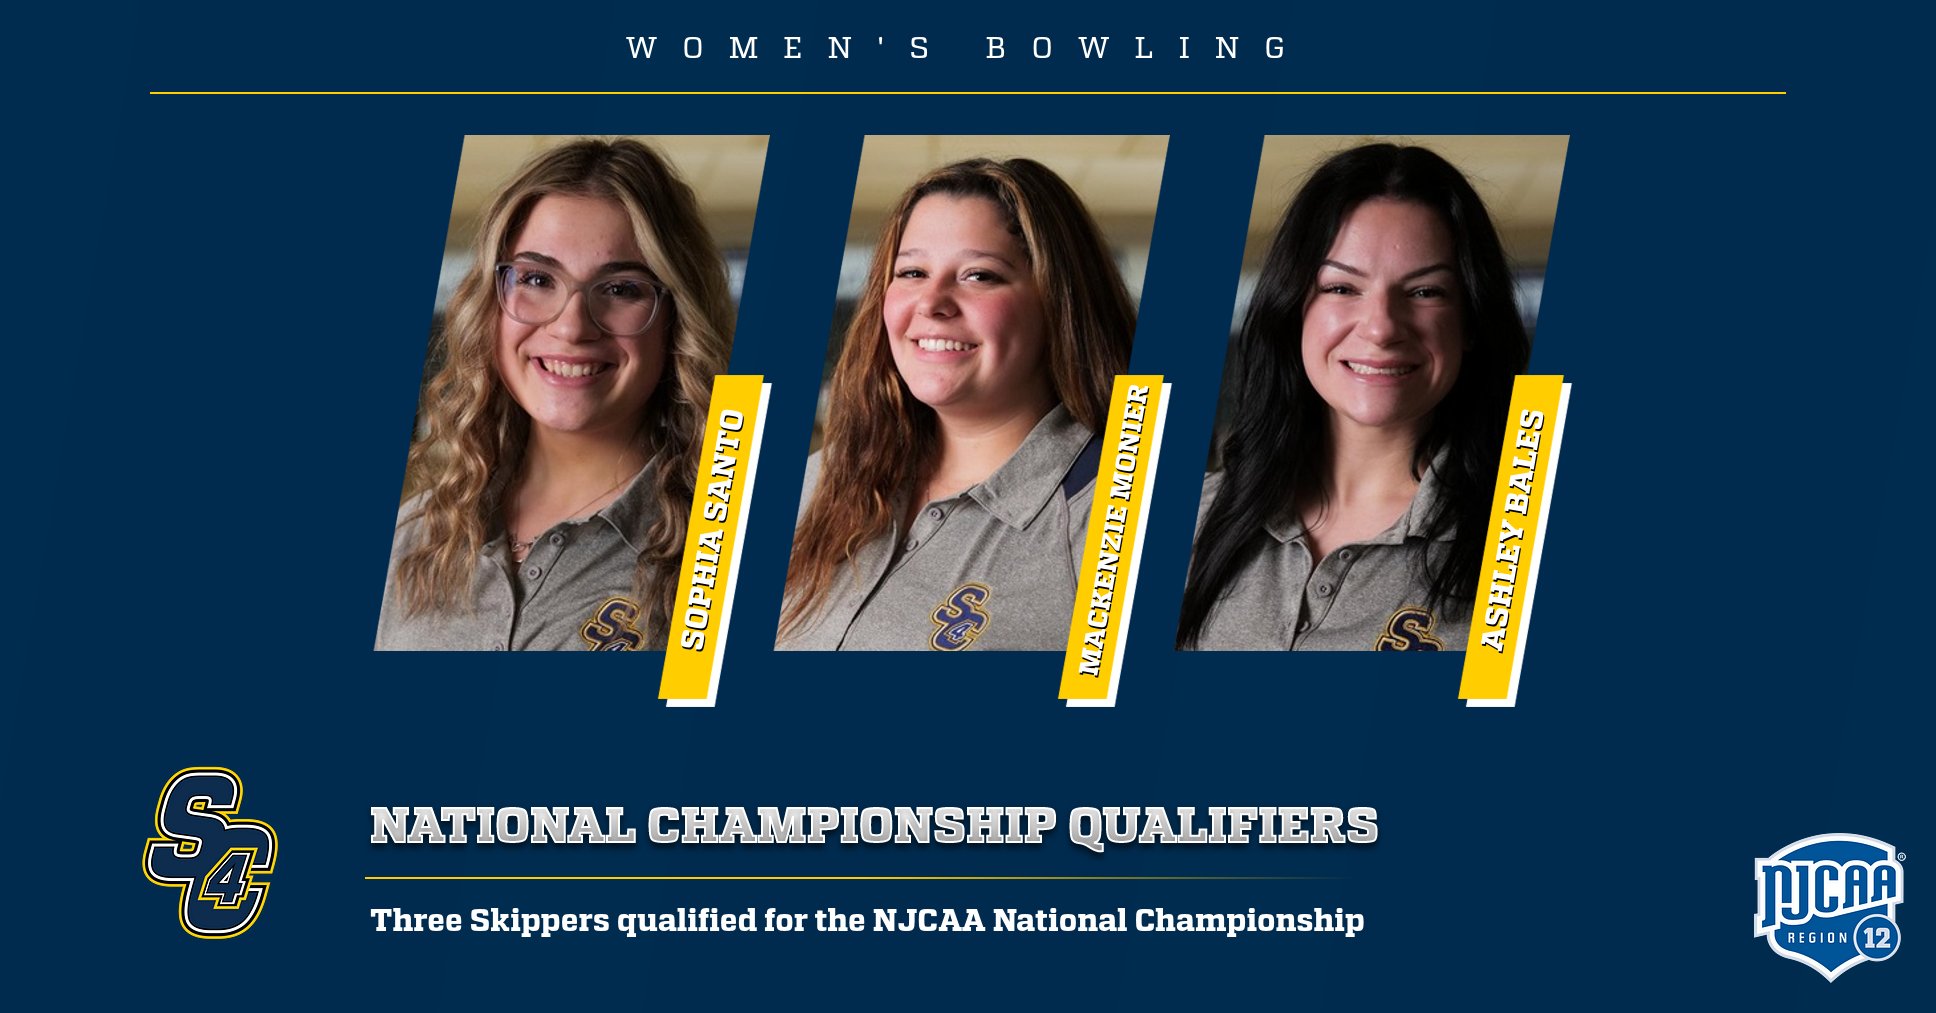 Women's Bowling: Three Skippers Qualify for Nationals While Santo and Monier Take Home a Bundle of Awards at the NJCAA Region 12 Championship